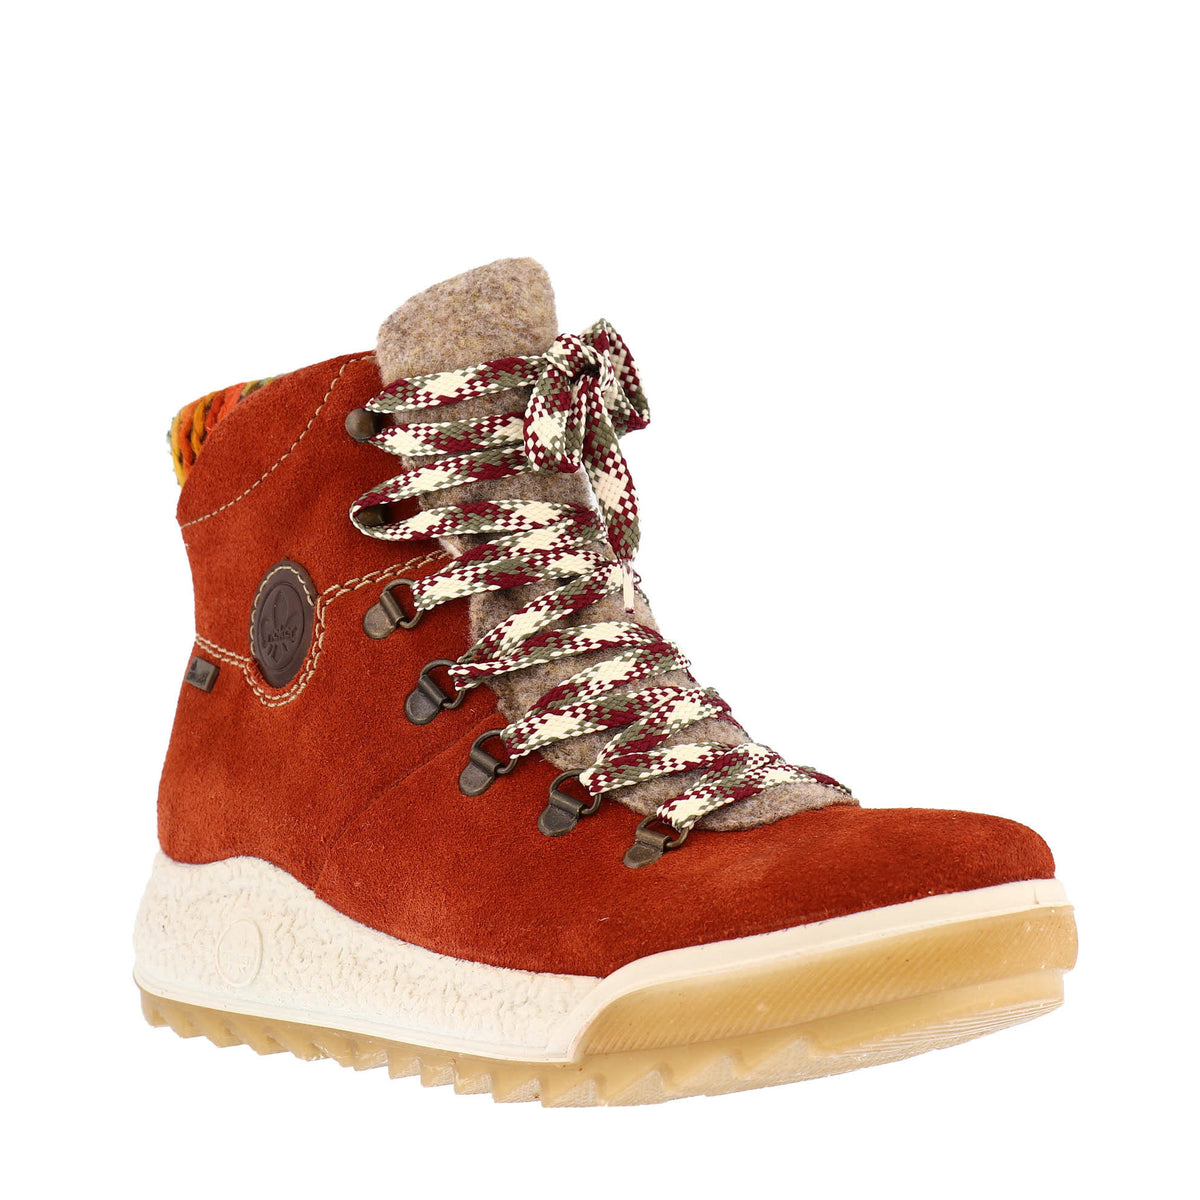 Rieker RIEKER LIGHTWEIGHT URBAN HIKER WITH FUR RED - WOMENS with patterned laces, a shearling collar, and a water-repellent RiekerTex membrane.